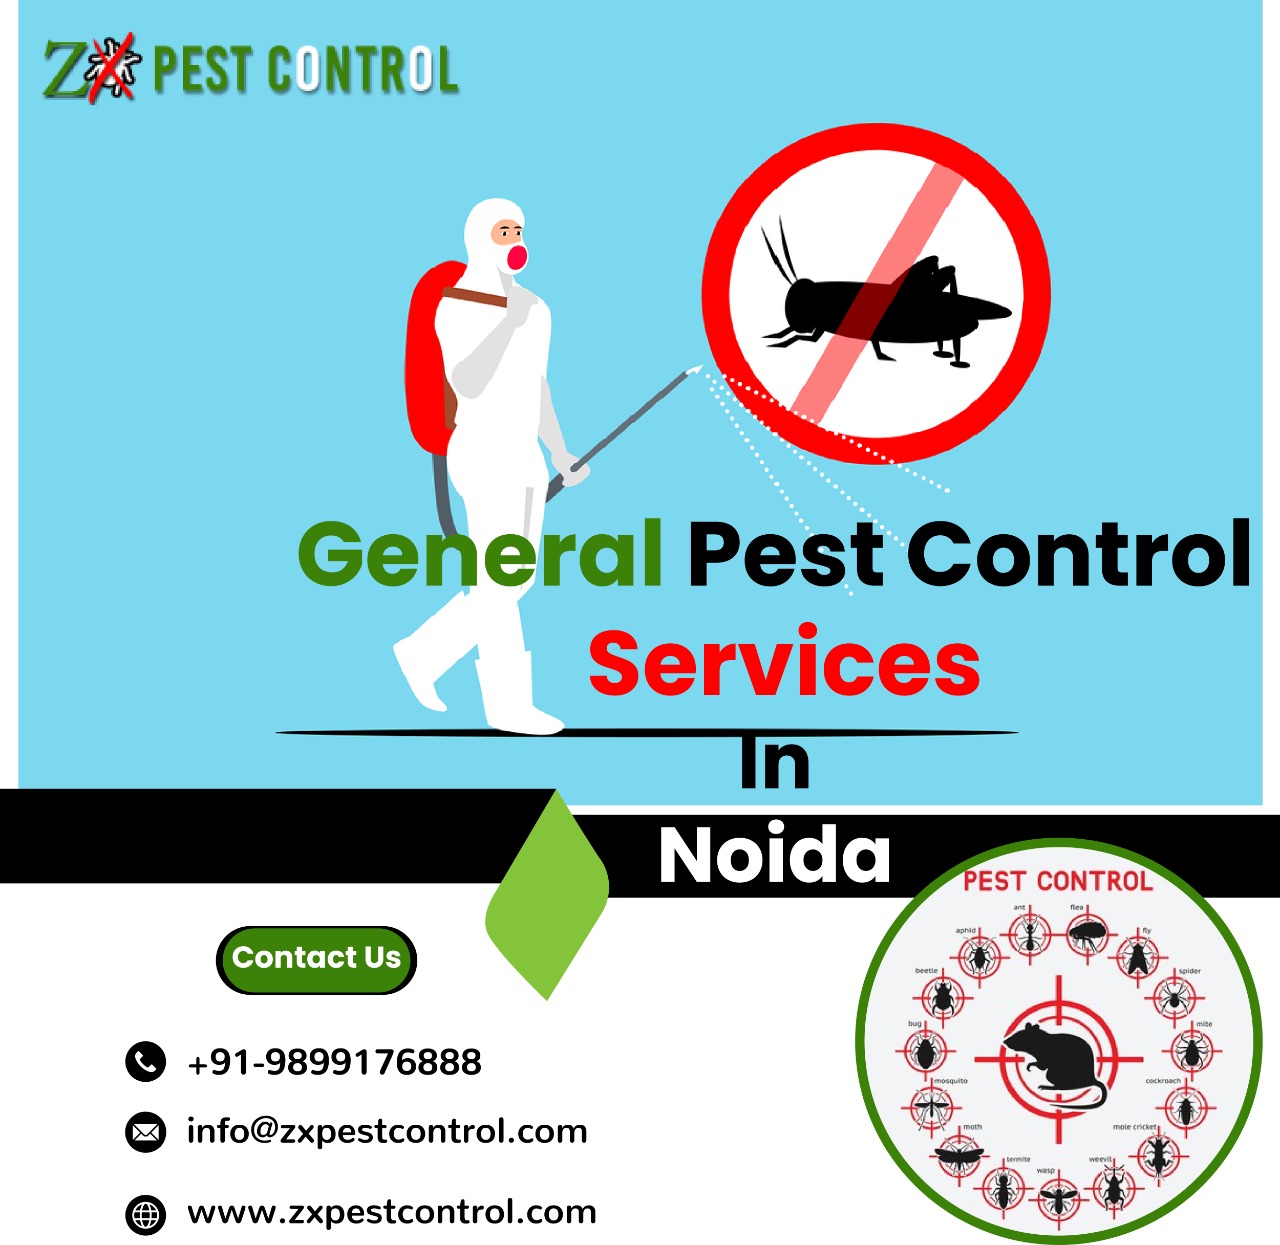 Get Our Services in Noida to Keep Your Home Pest-Free - Classified Ads Shop